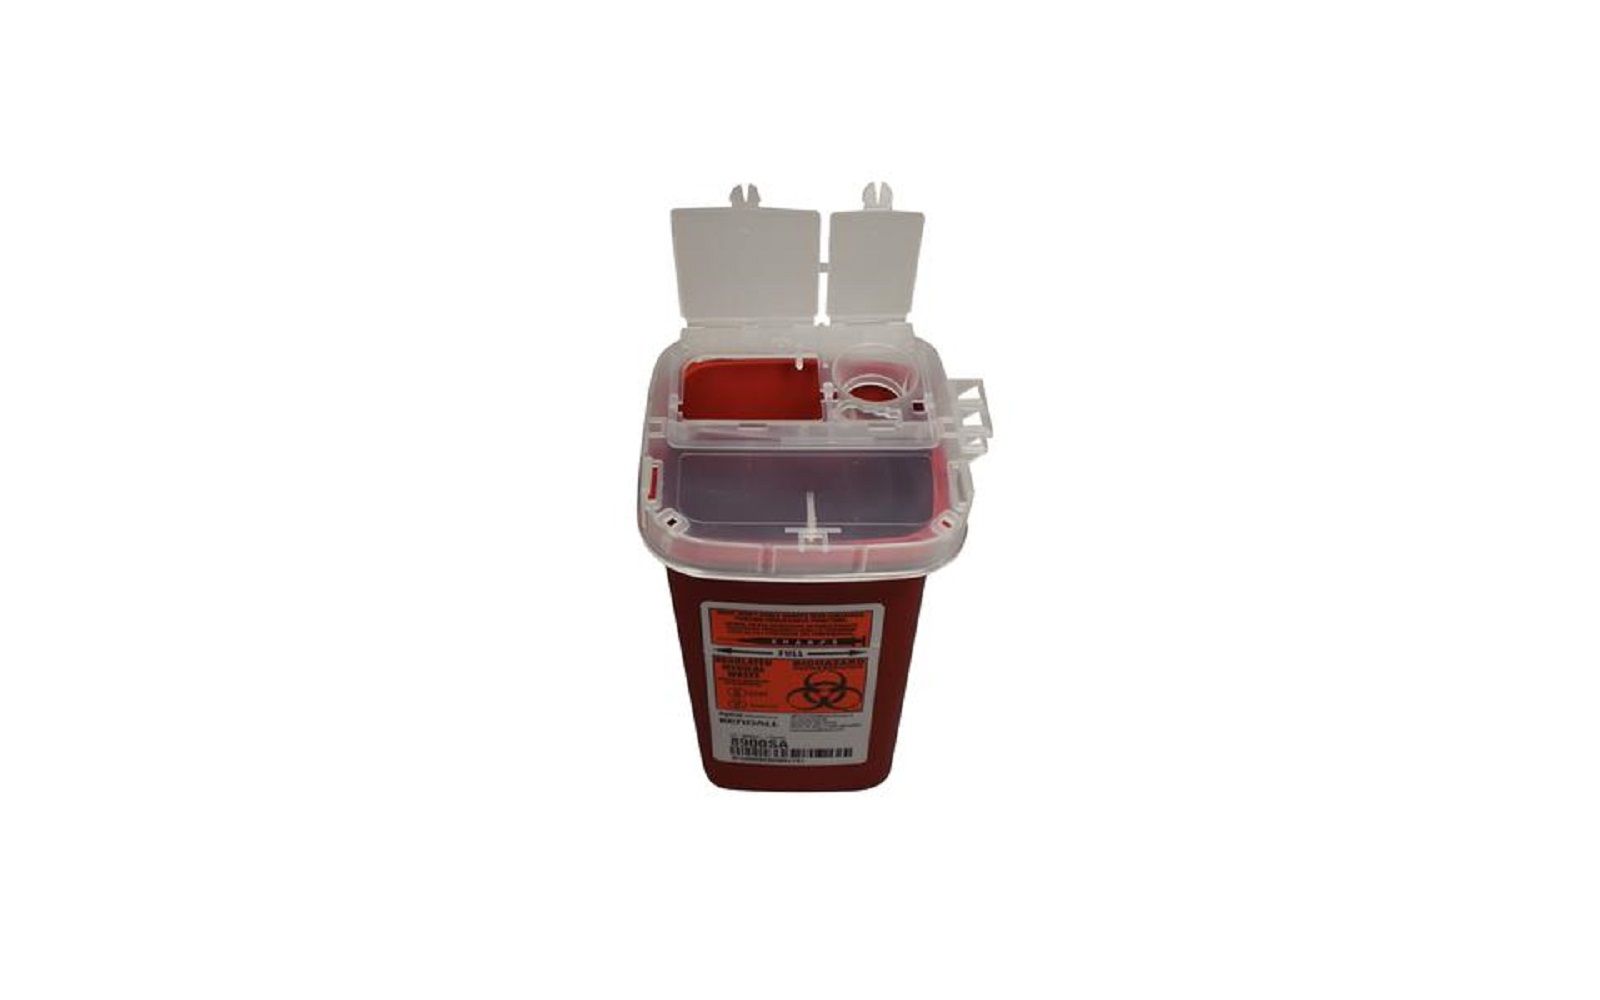 Sharpsafety™ phlebotomy sharps containers - 1 quart, red